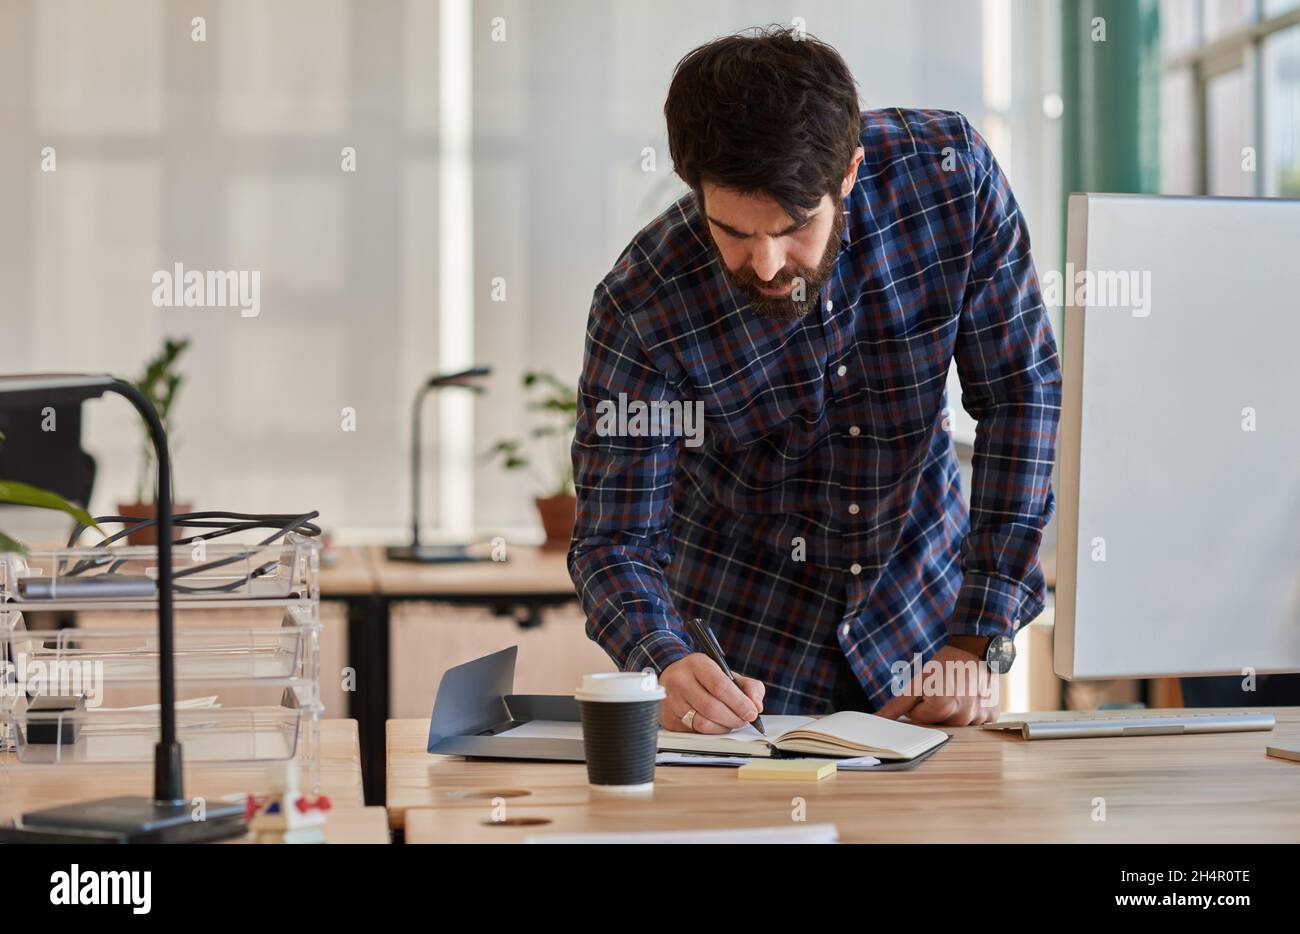 Young businessman leaning over his desk and writing in a notebook Stock Photo